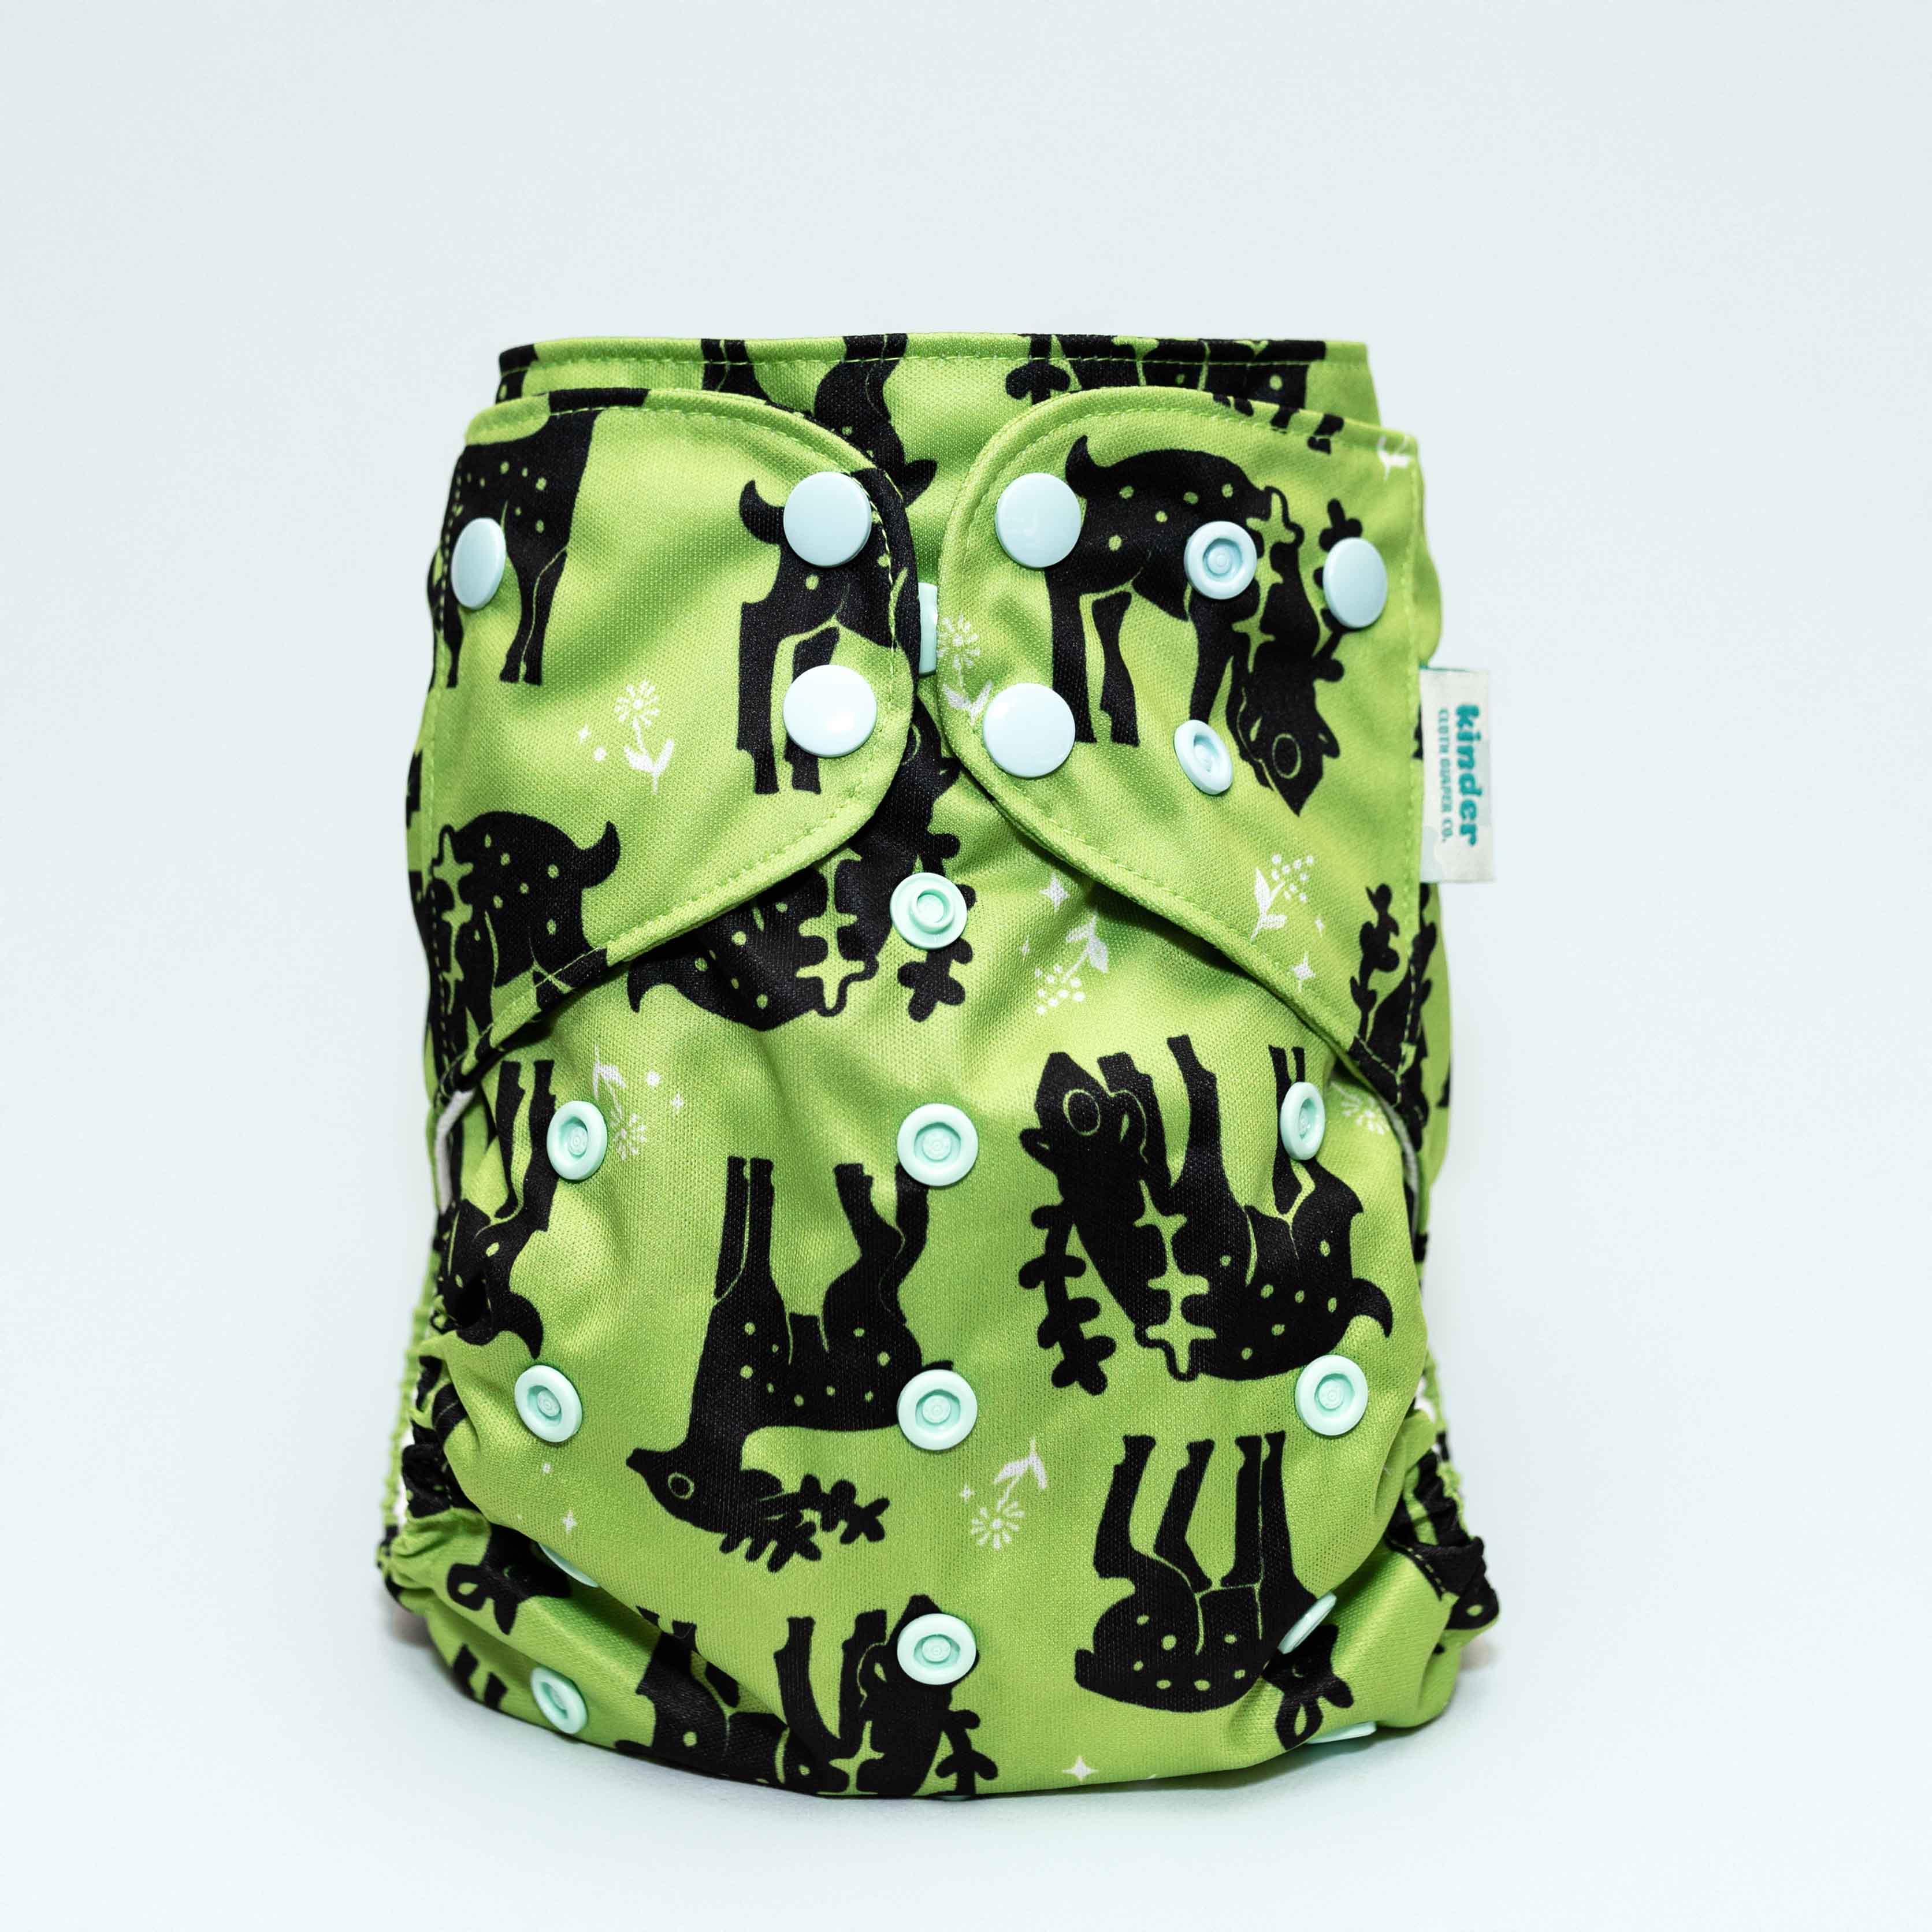 Kinder Cloth Pocket Diaper with Athletic Wicking Jersey 2.0 with Bamboo Insert